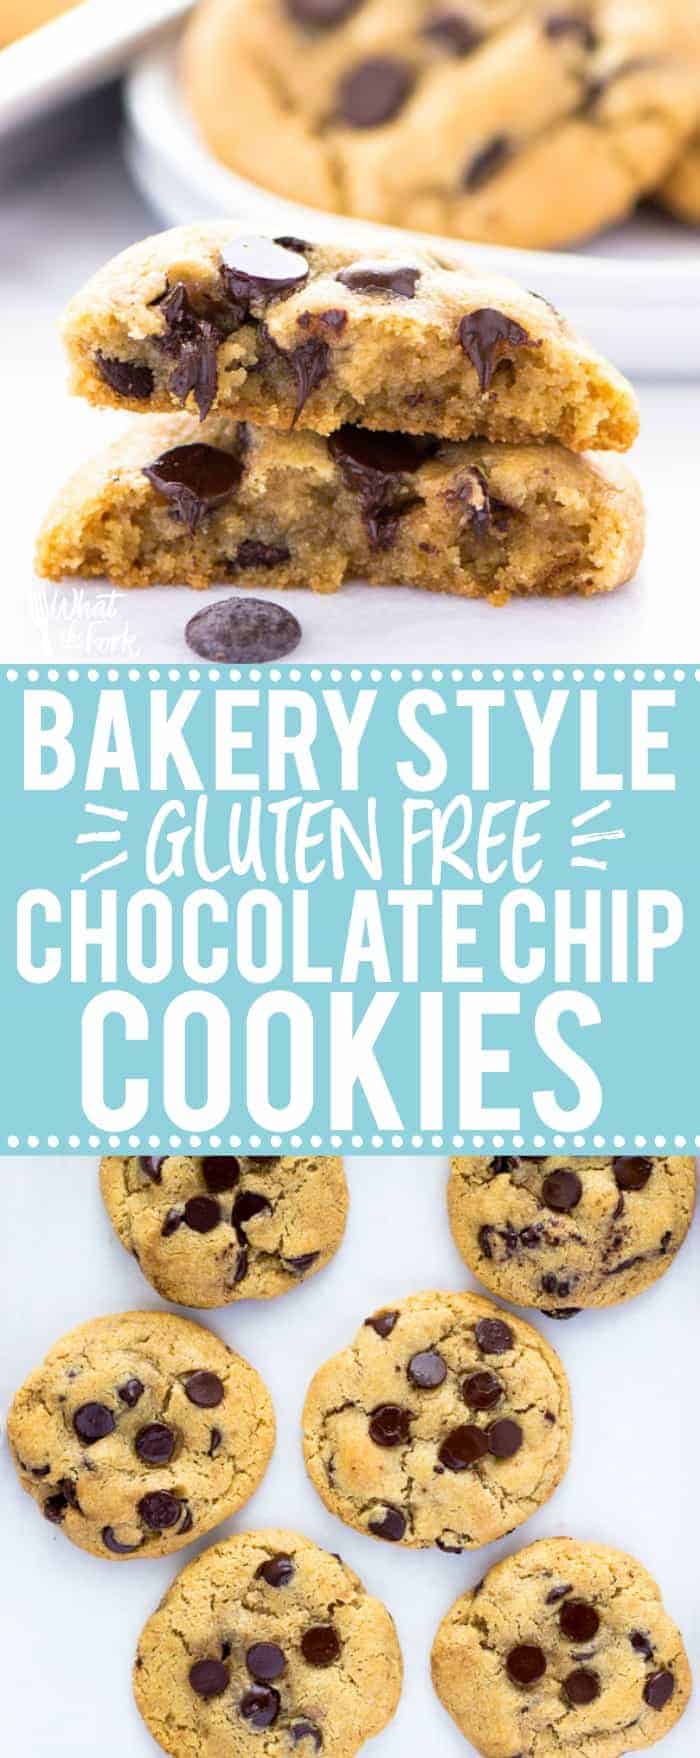 Perfect bakery style chocolate chip cookies